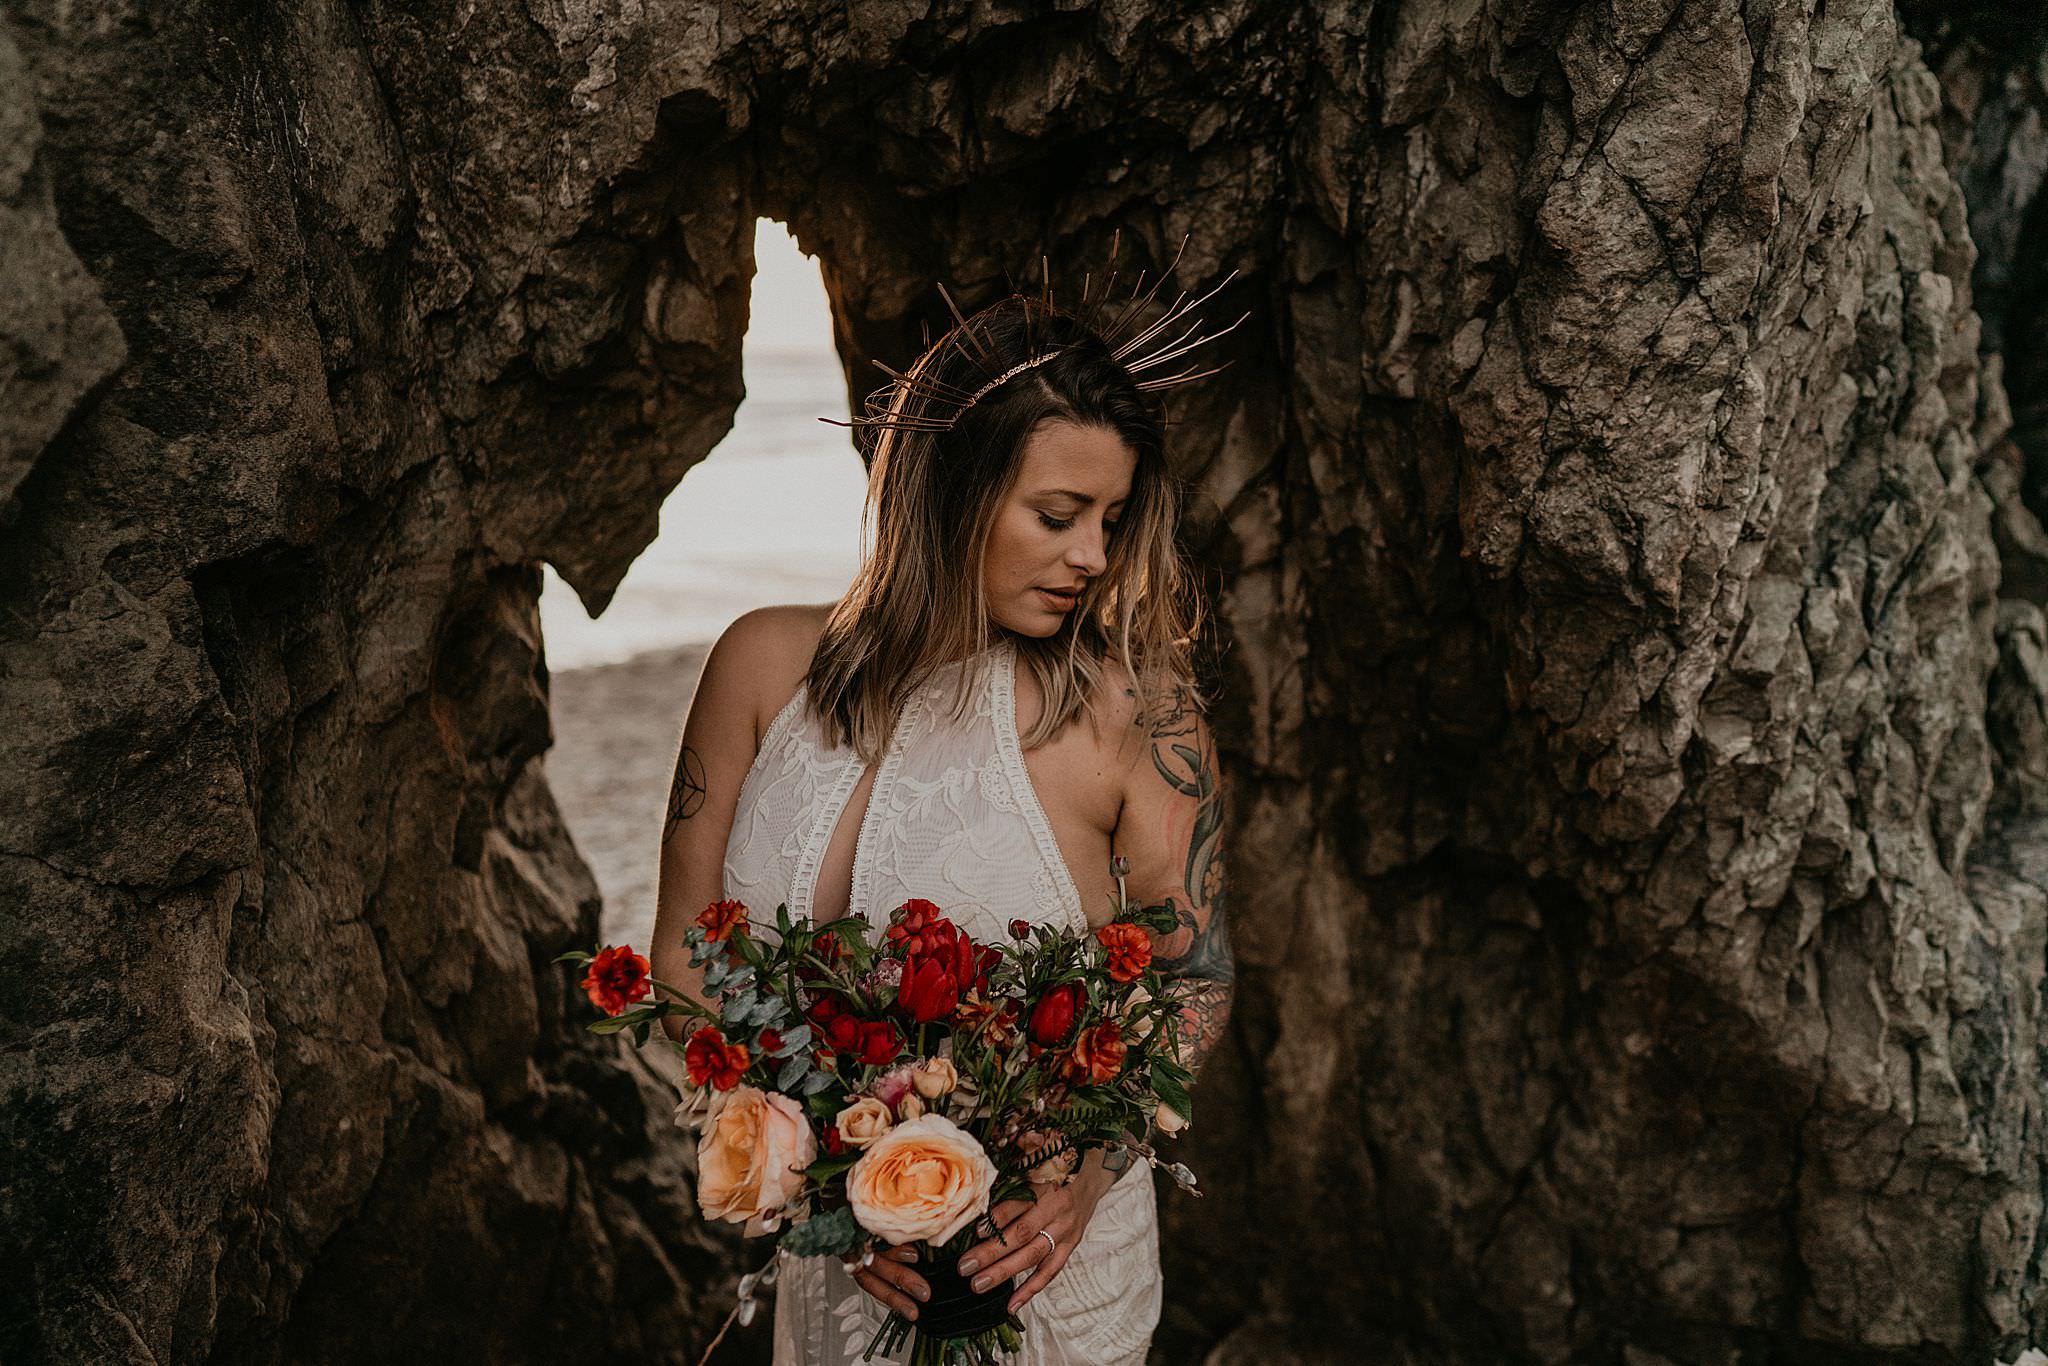 A very PNW elopement and vow renewal at Ruby Beach Olympic National Park as seen on junebug weddings